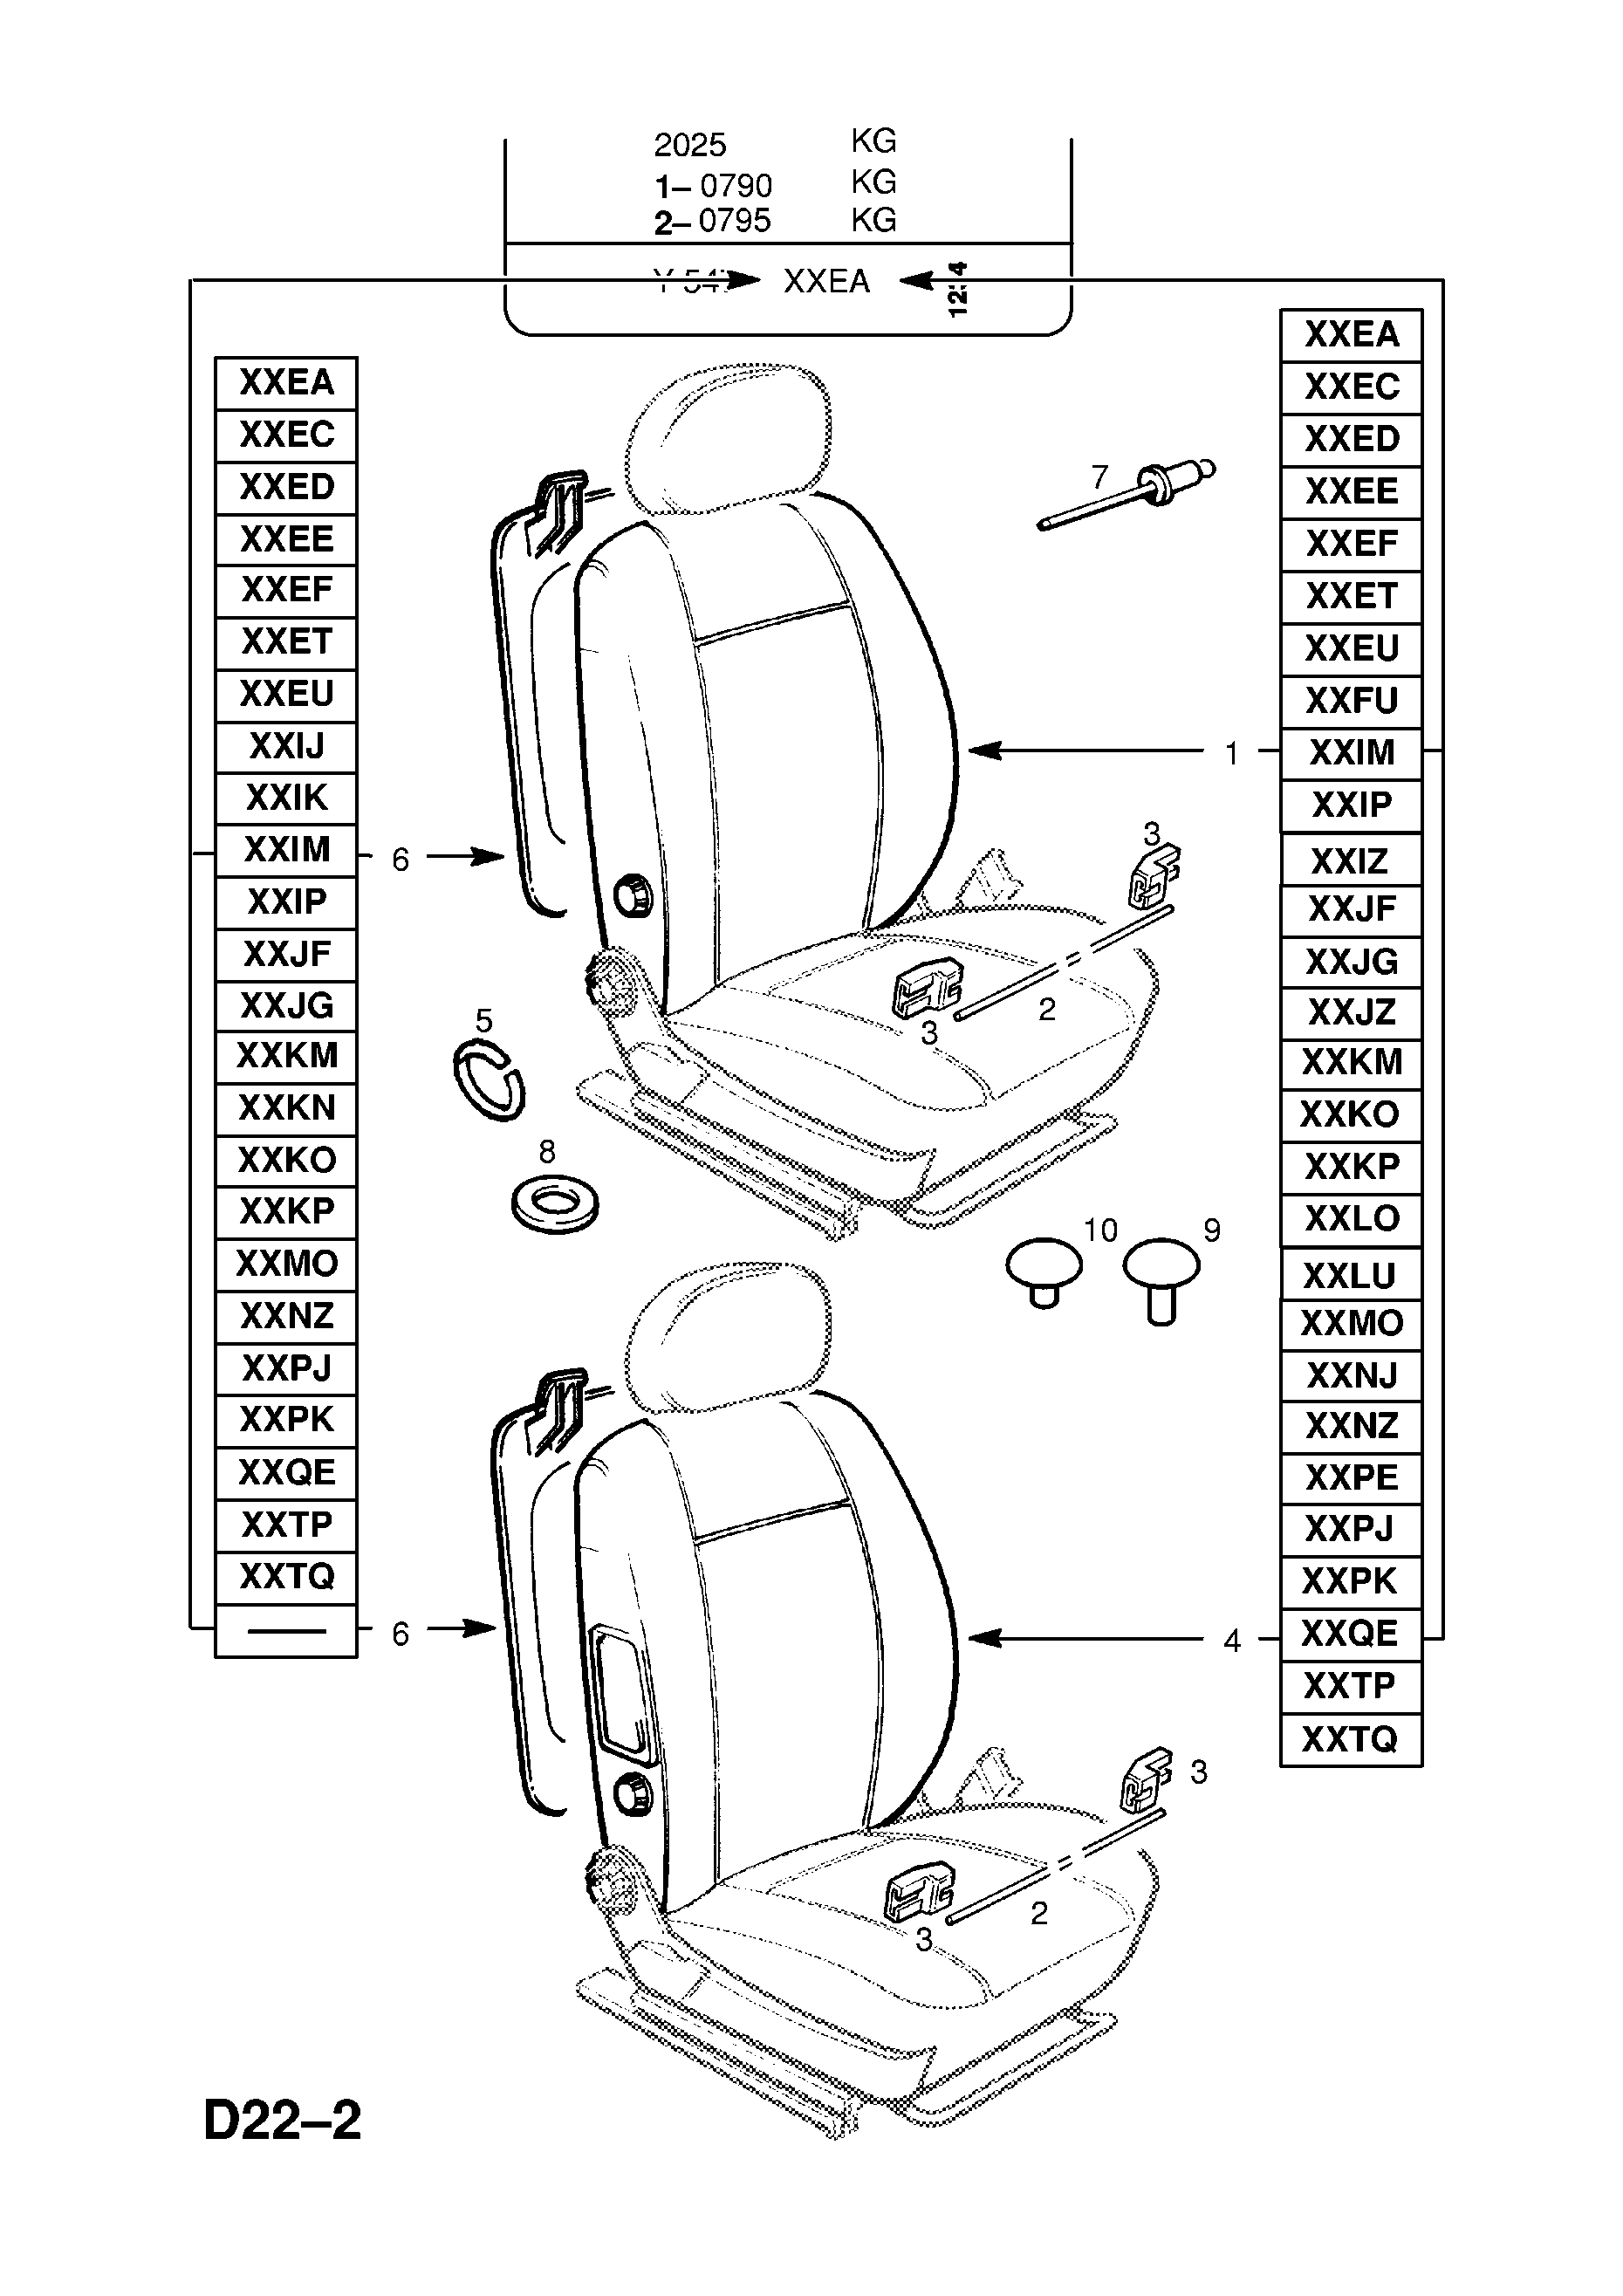 BACK / SQUAB TRIM (CONTD.) <small><i>[MONOCAB (F75) (FOR ACTIVE HEAD RESTRAINT) (EXC.SIDE AIR BAG) (NOT FOR RECARO SEATS)]</i></small>